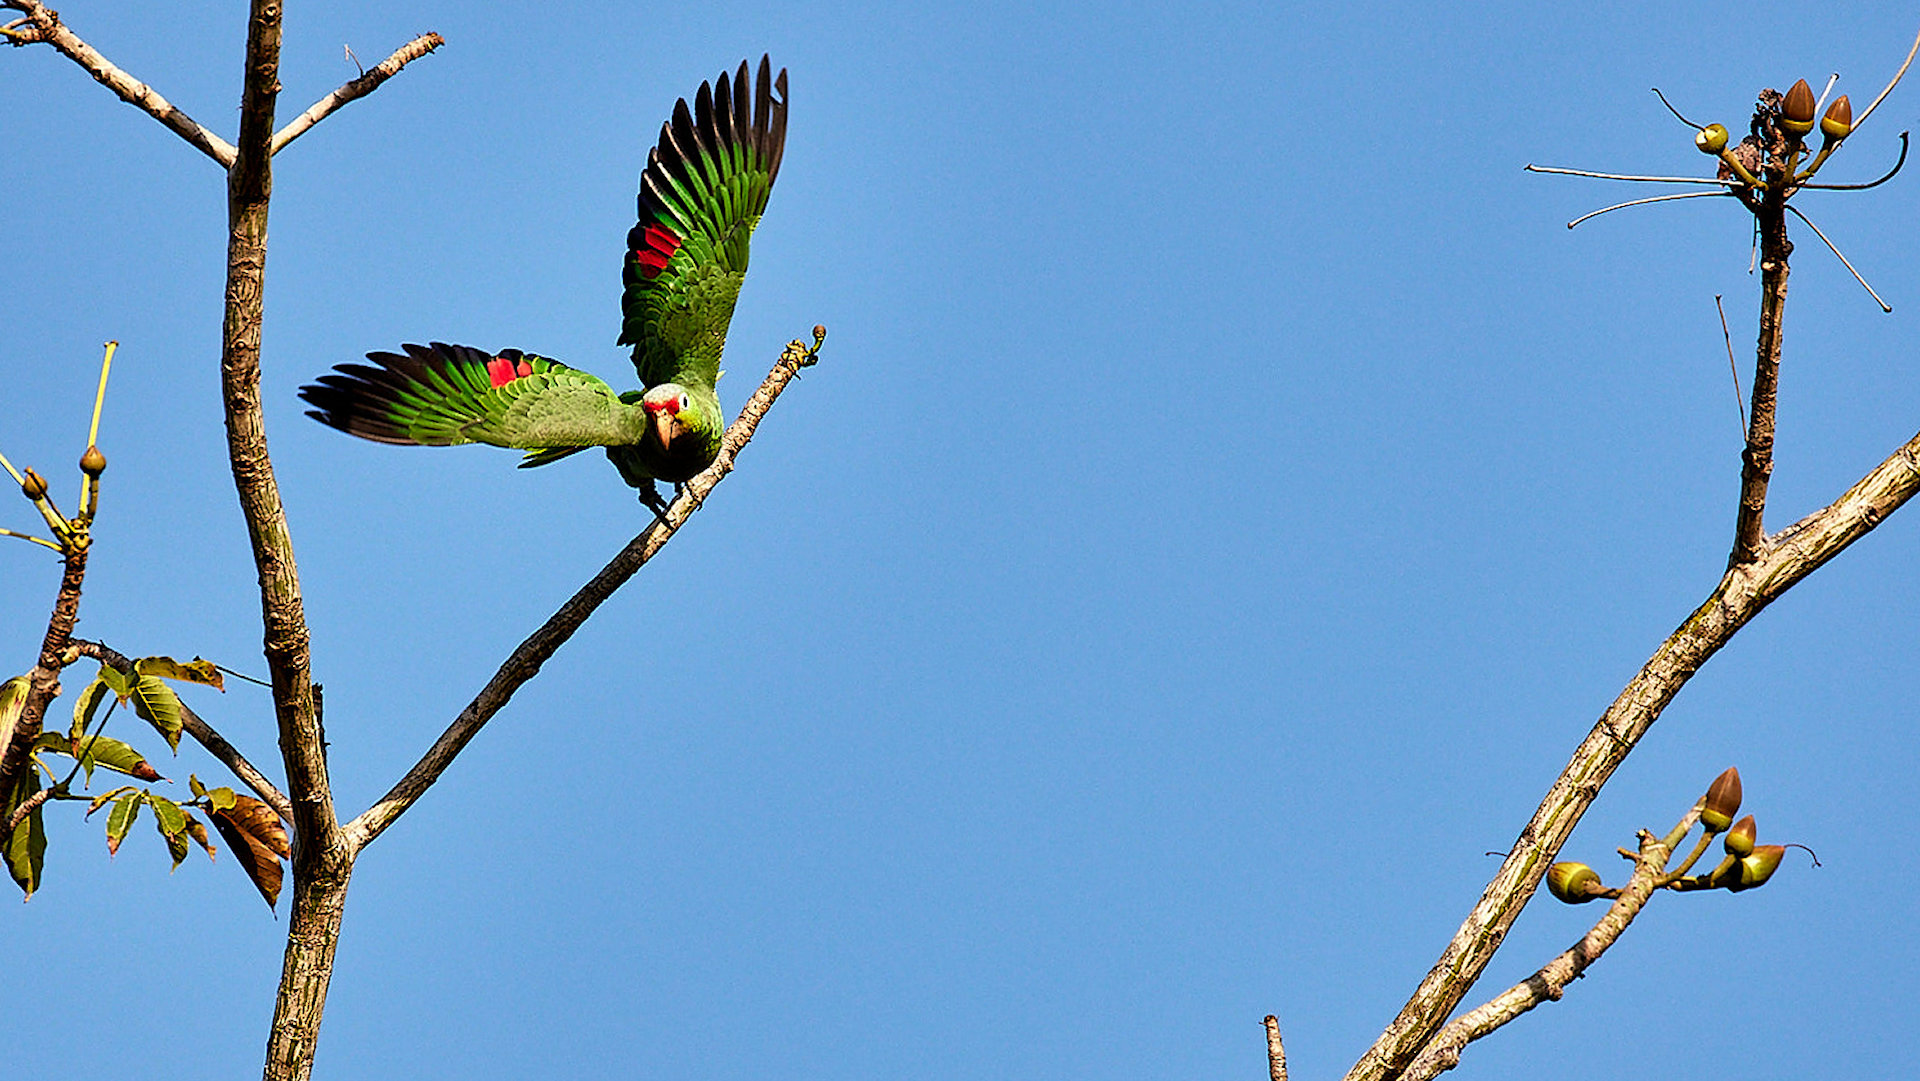 Red lored parrot taking off - image 14